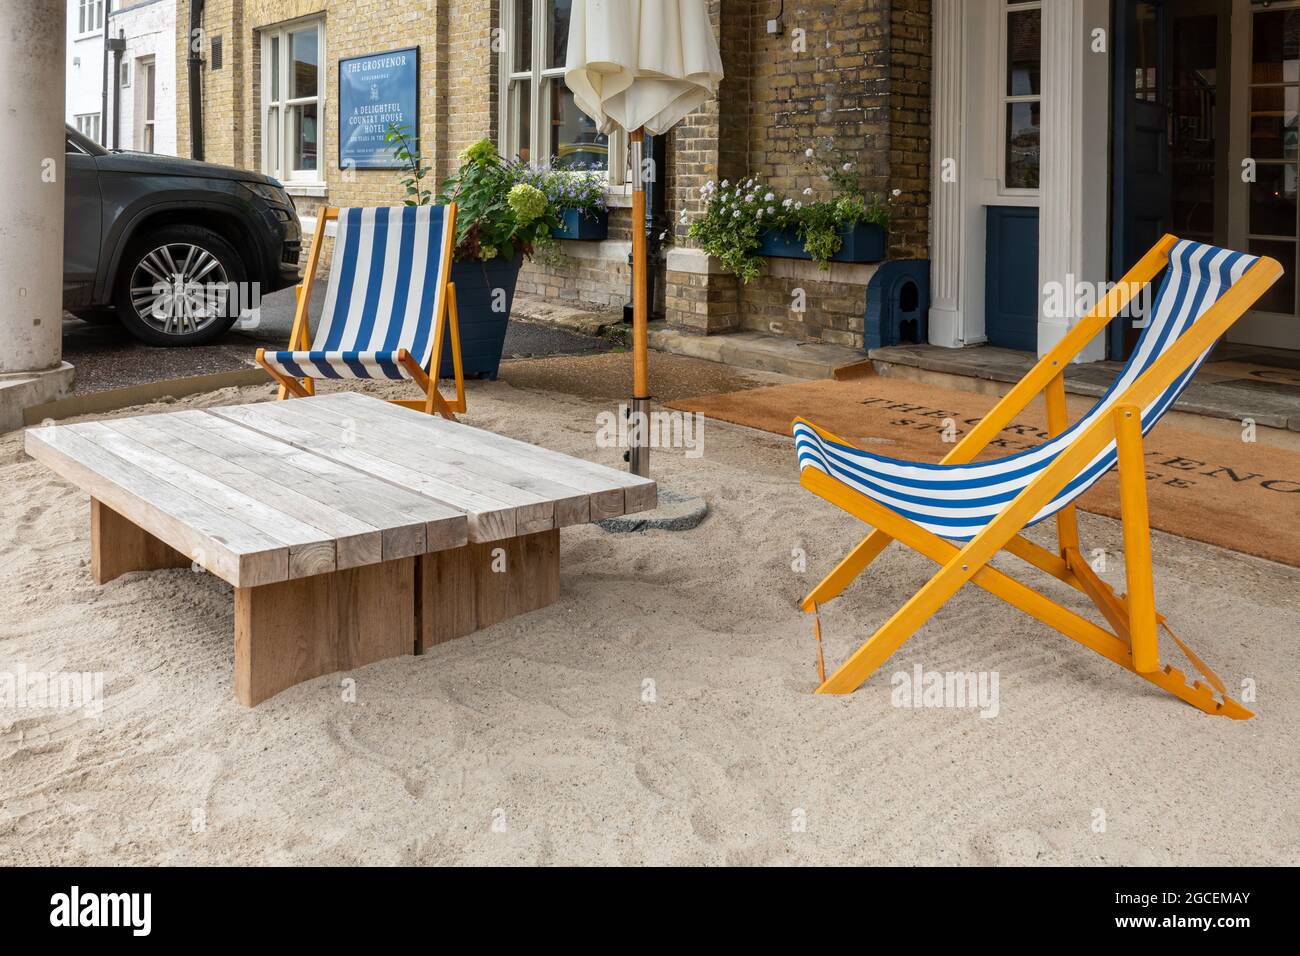 The Grosvenor Hotel in the Hampshire town of Stockbridge, England, UK, with deckchairs and fake sandy beach in the front porch, staycation 2021 Stock Photo